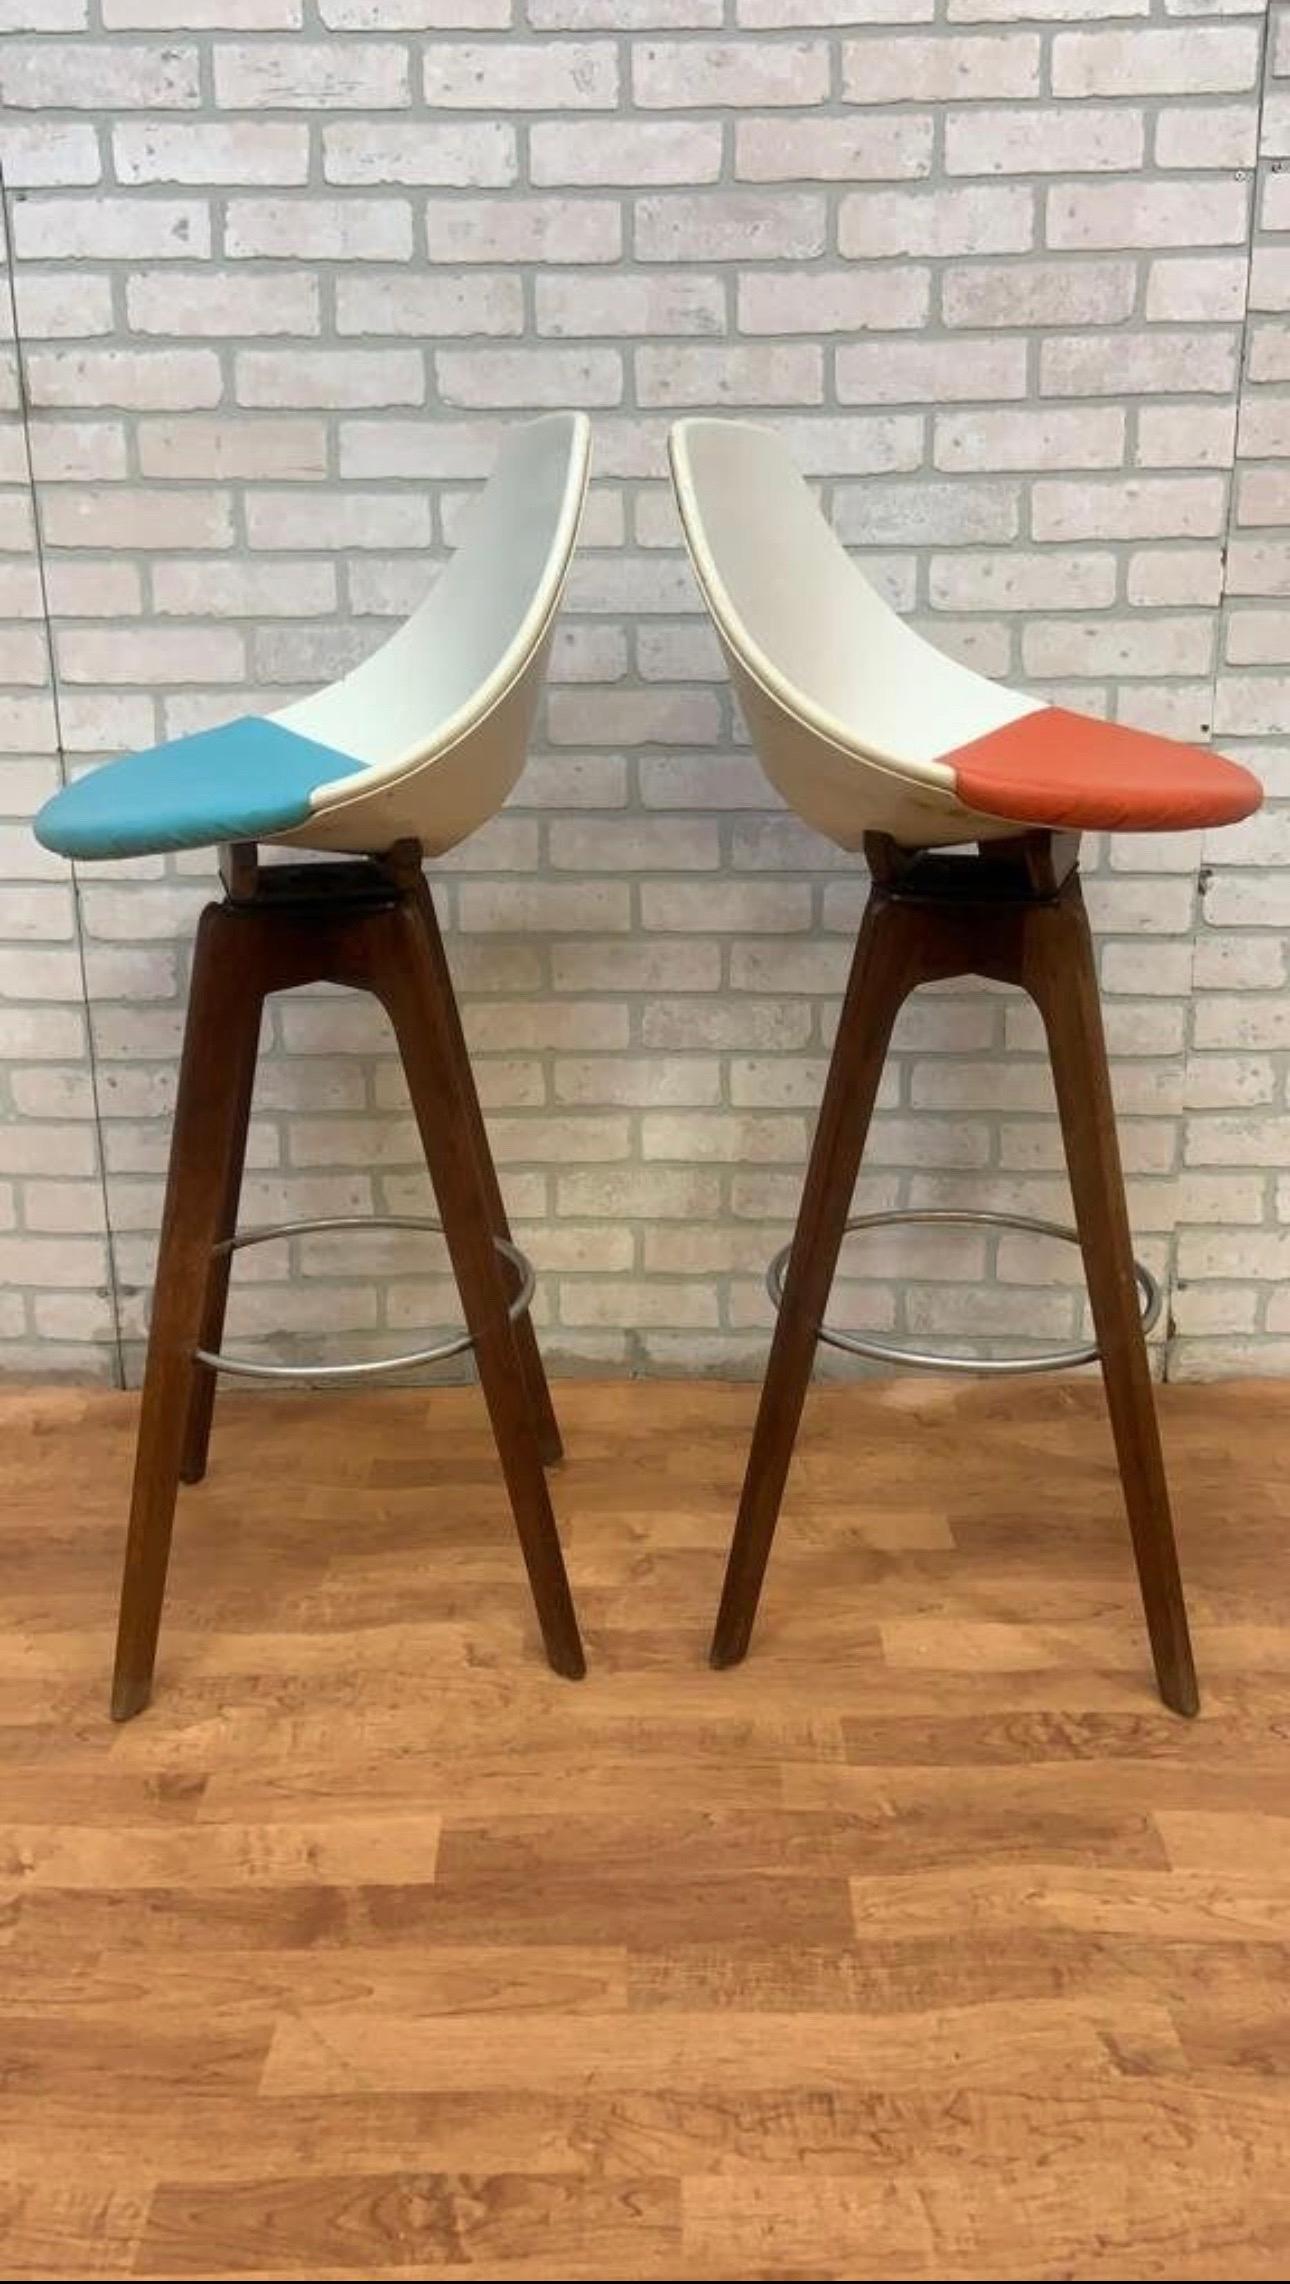 Mid-Century Modern Stools Designed by John Yellen - Pair In Good Condition For Sale In Chicago, IL